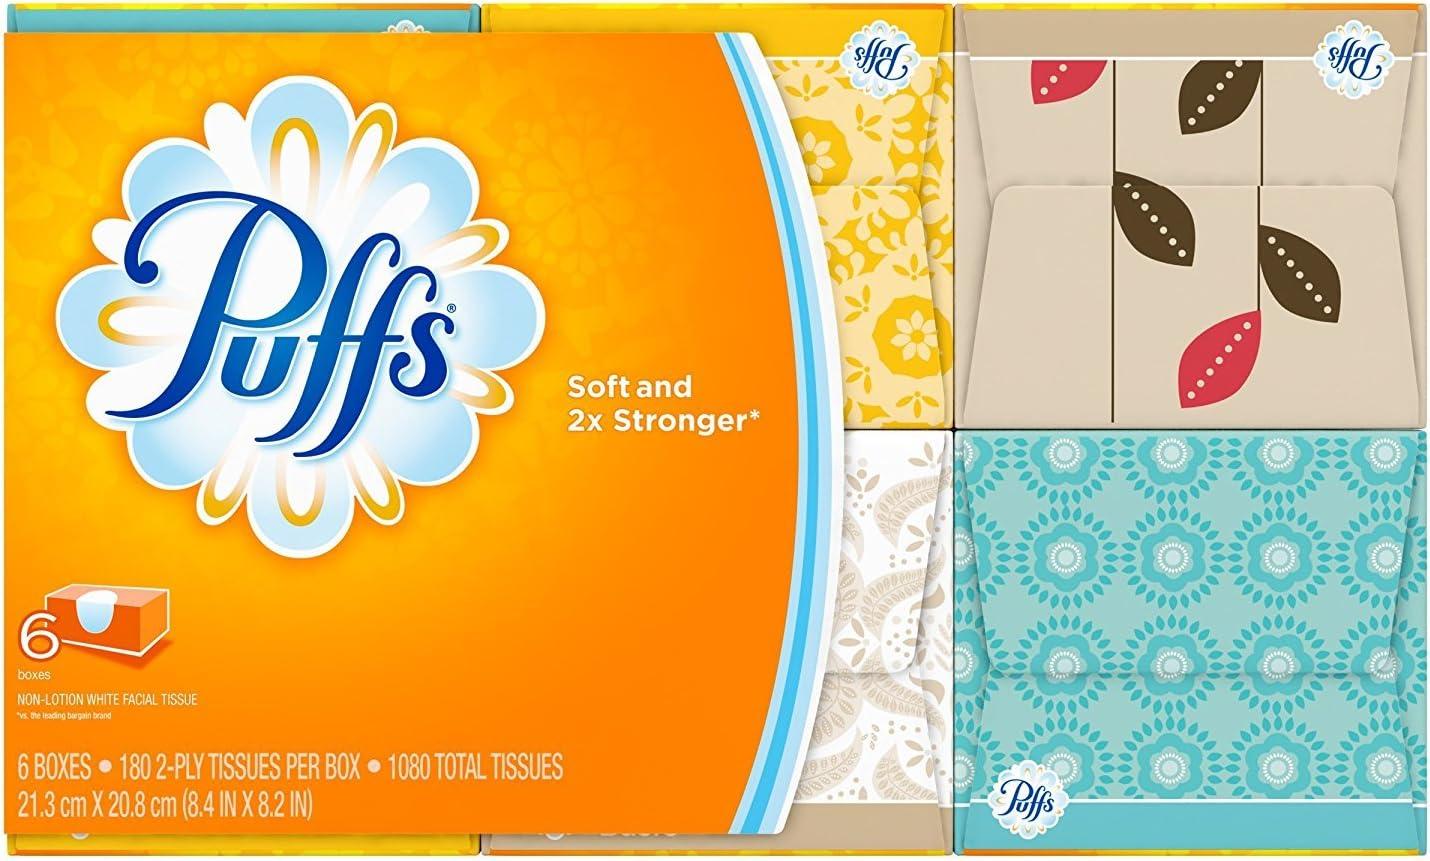 Save on Puffs Plus Lotion Facial Tissues 2-Ply White Order Online Delivery